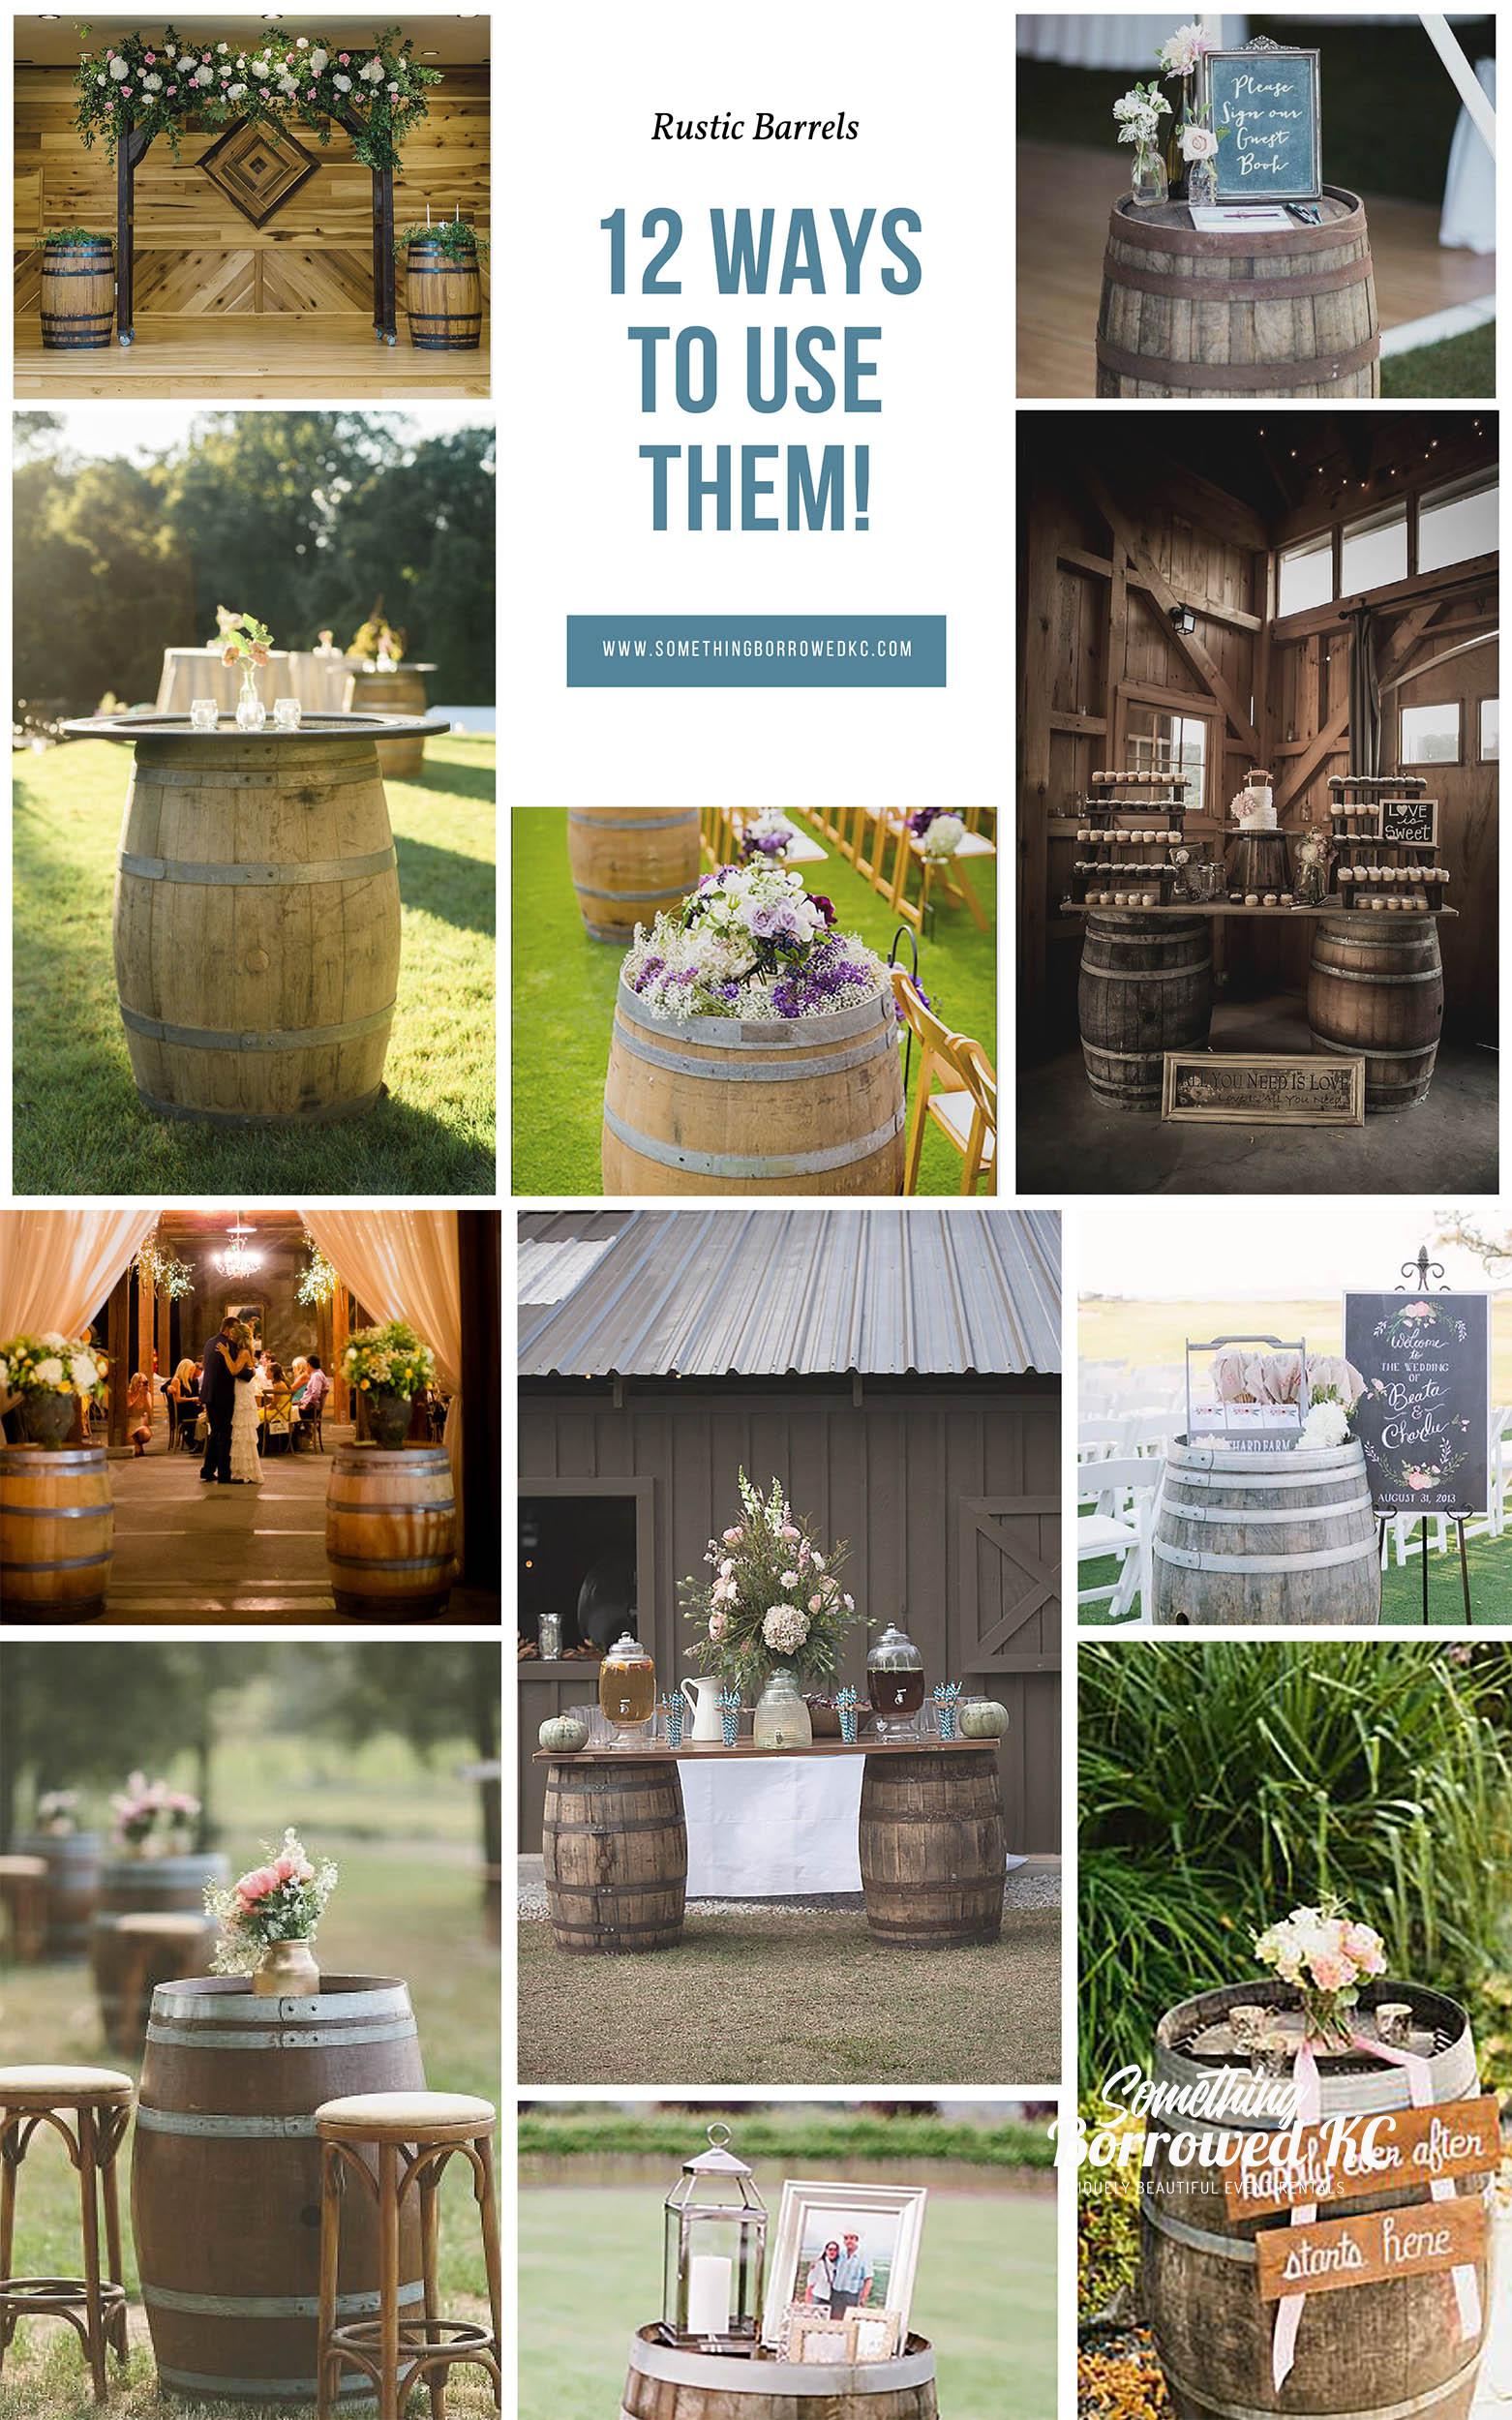 Ways to Use Our Rustic Barrels